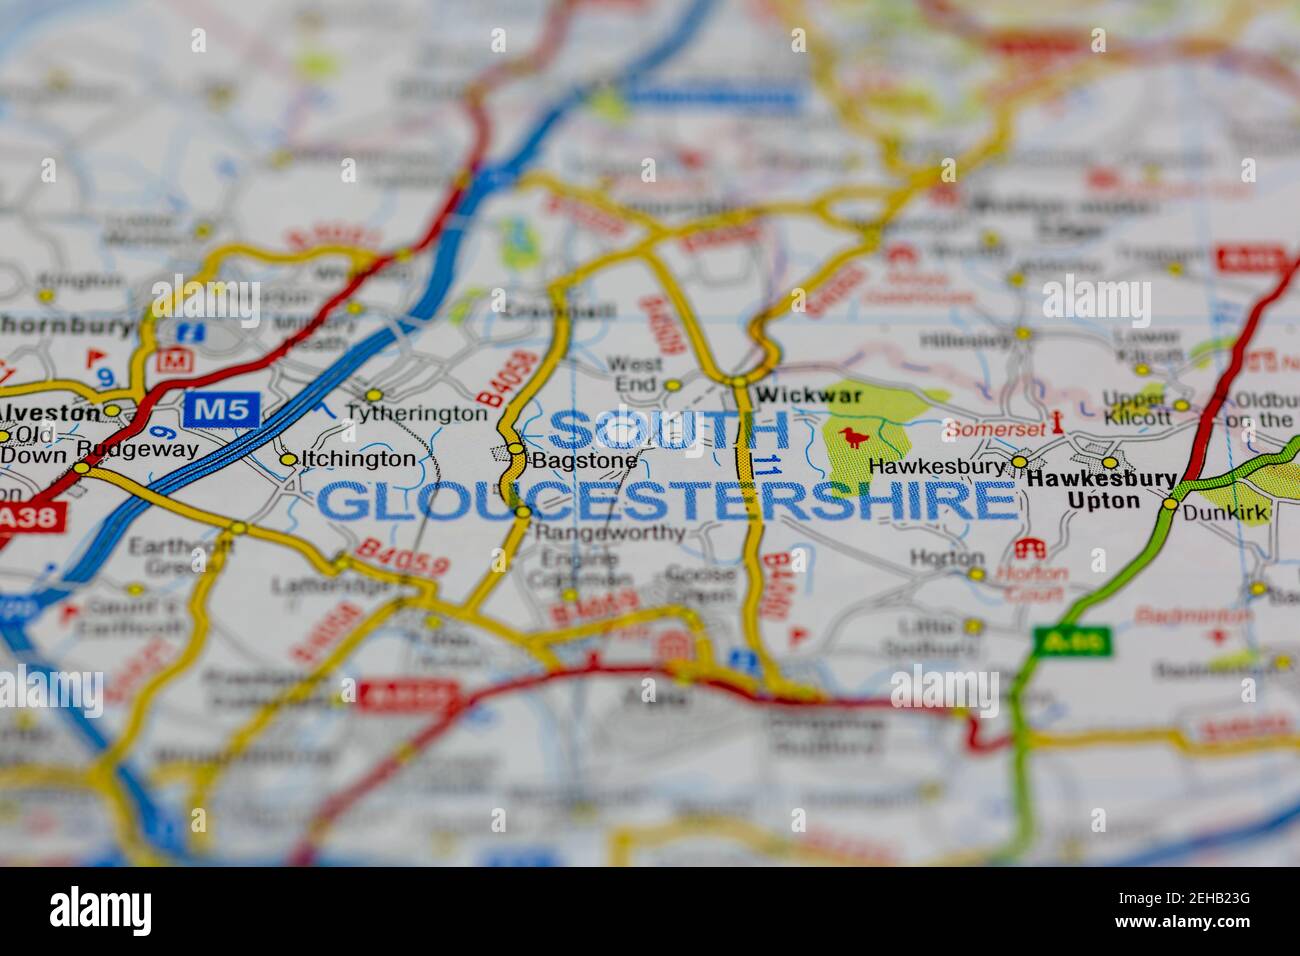 South Gloucestershire and surrounding areas shown on a road map or Geography map Stock Photo